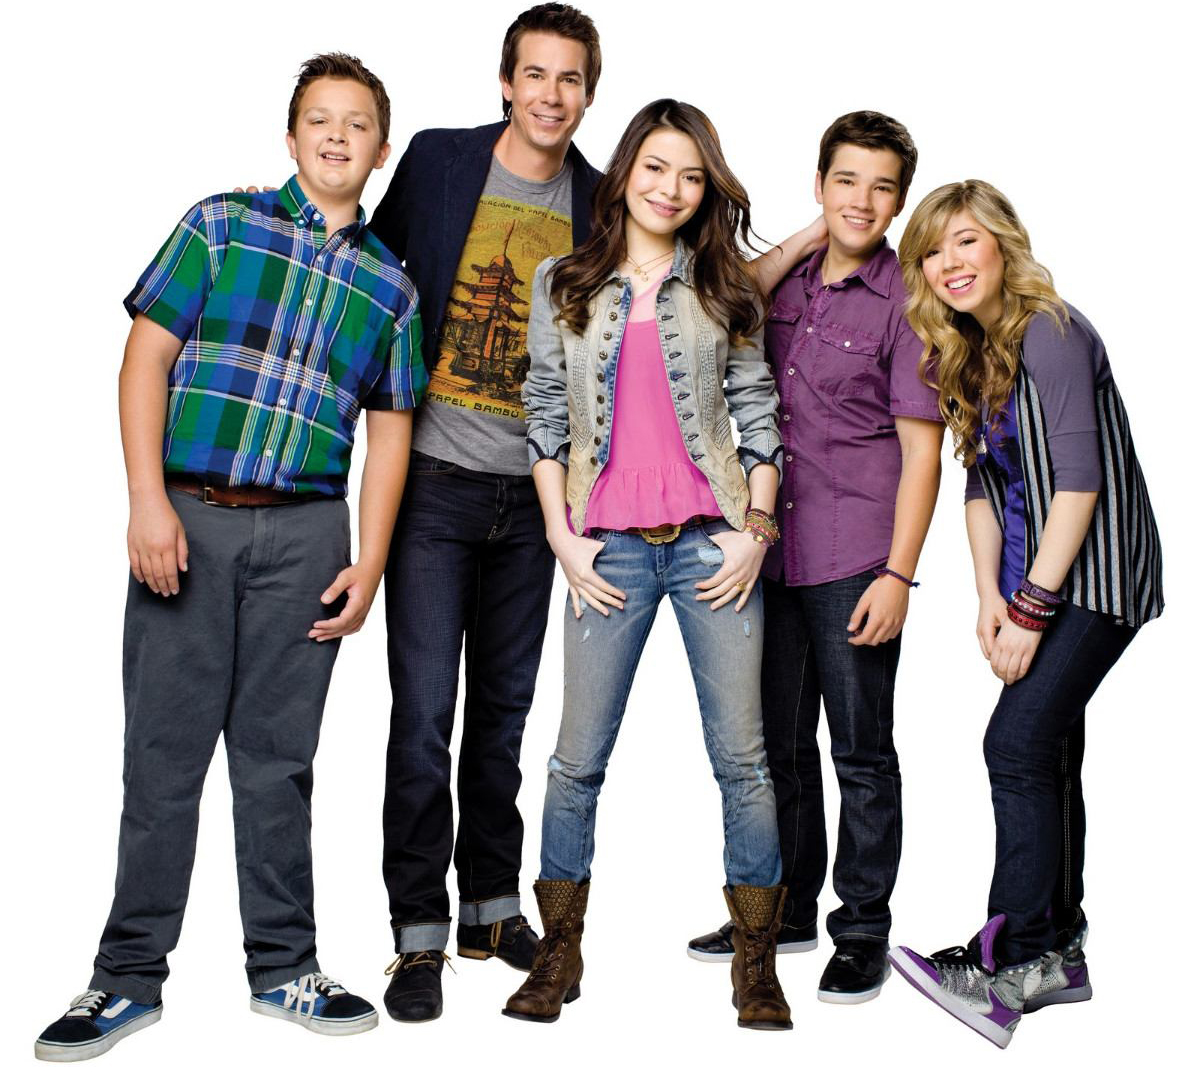 The iCarly Cast Reveals Their Fave Episodes Ever!